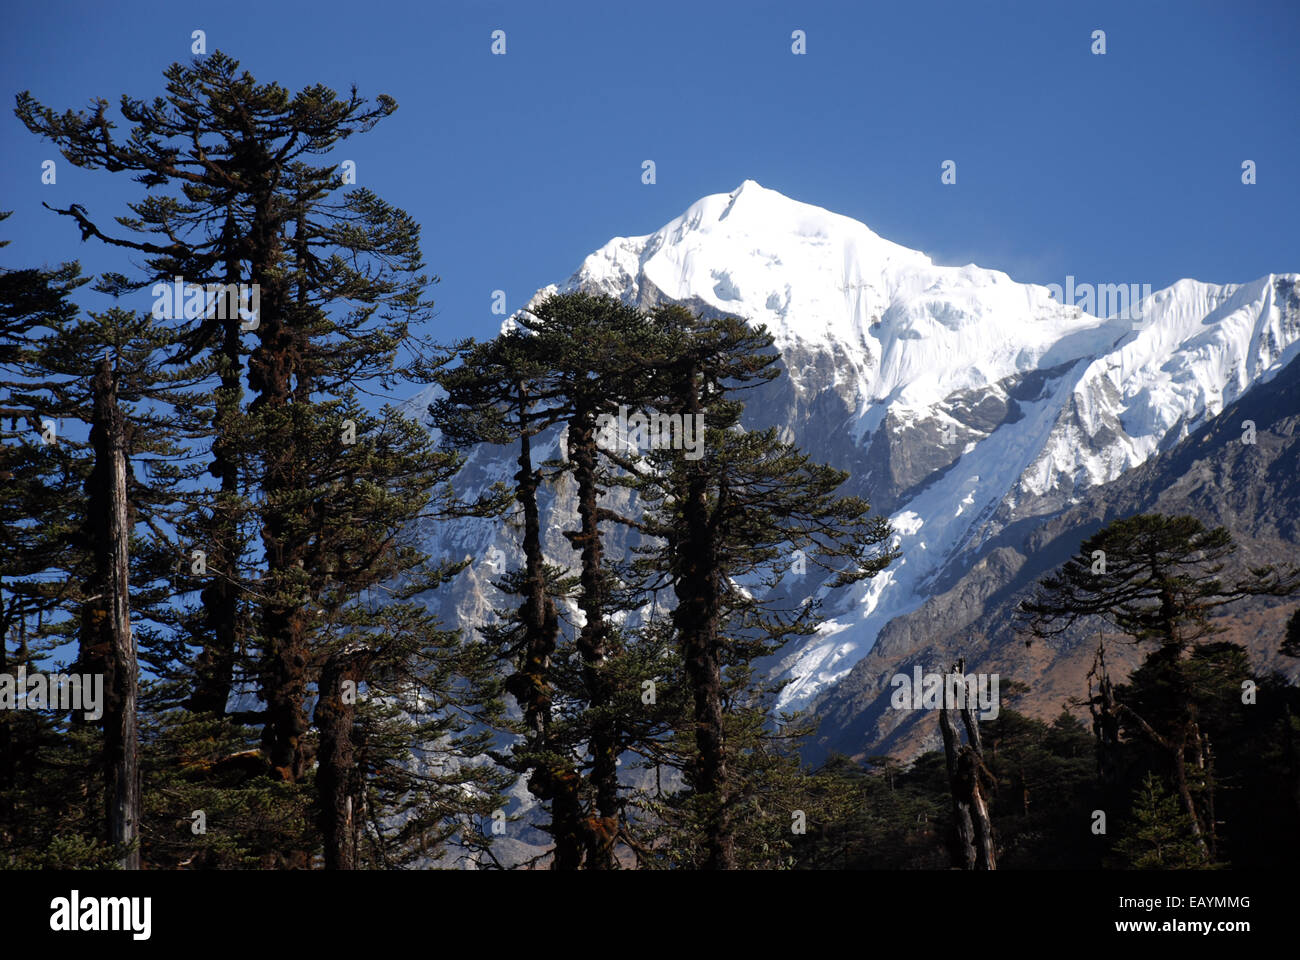 Snow capped peak of Pandim rises above the trees in the Indian Himalayas Stock Photo